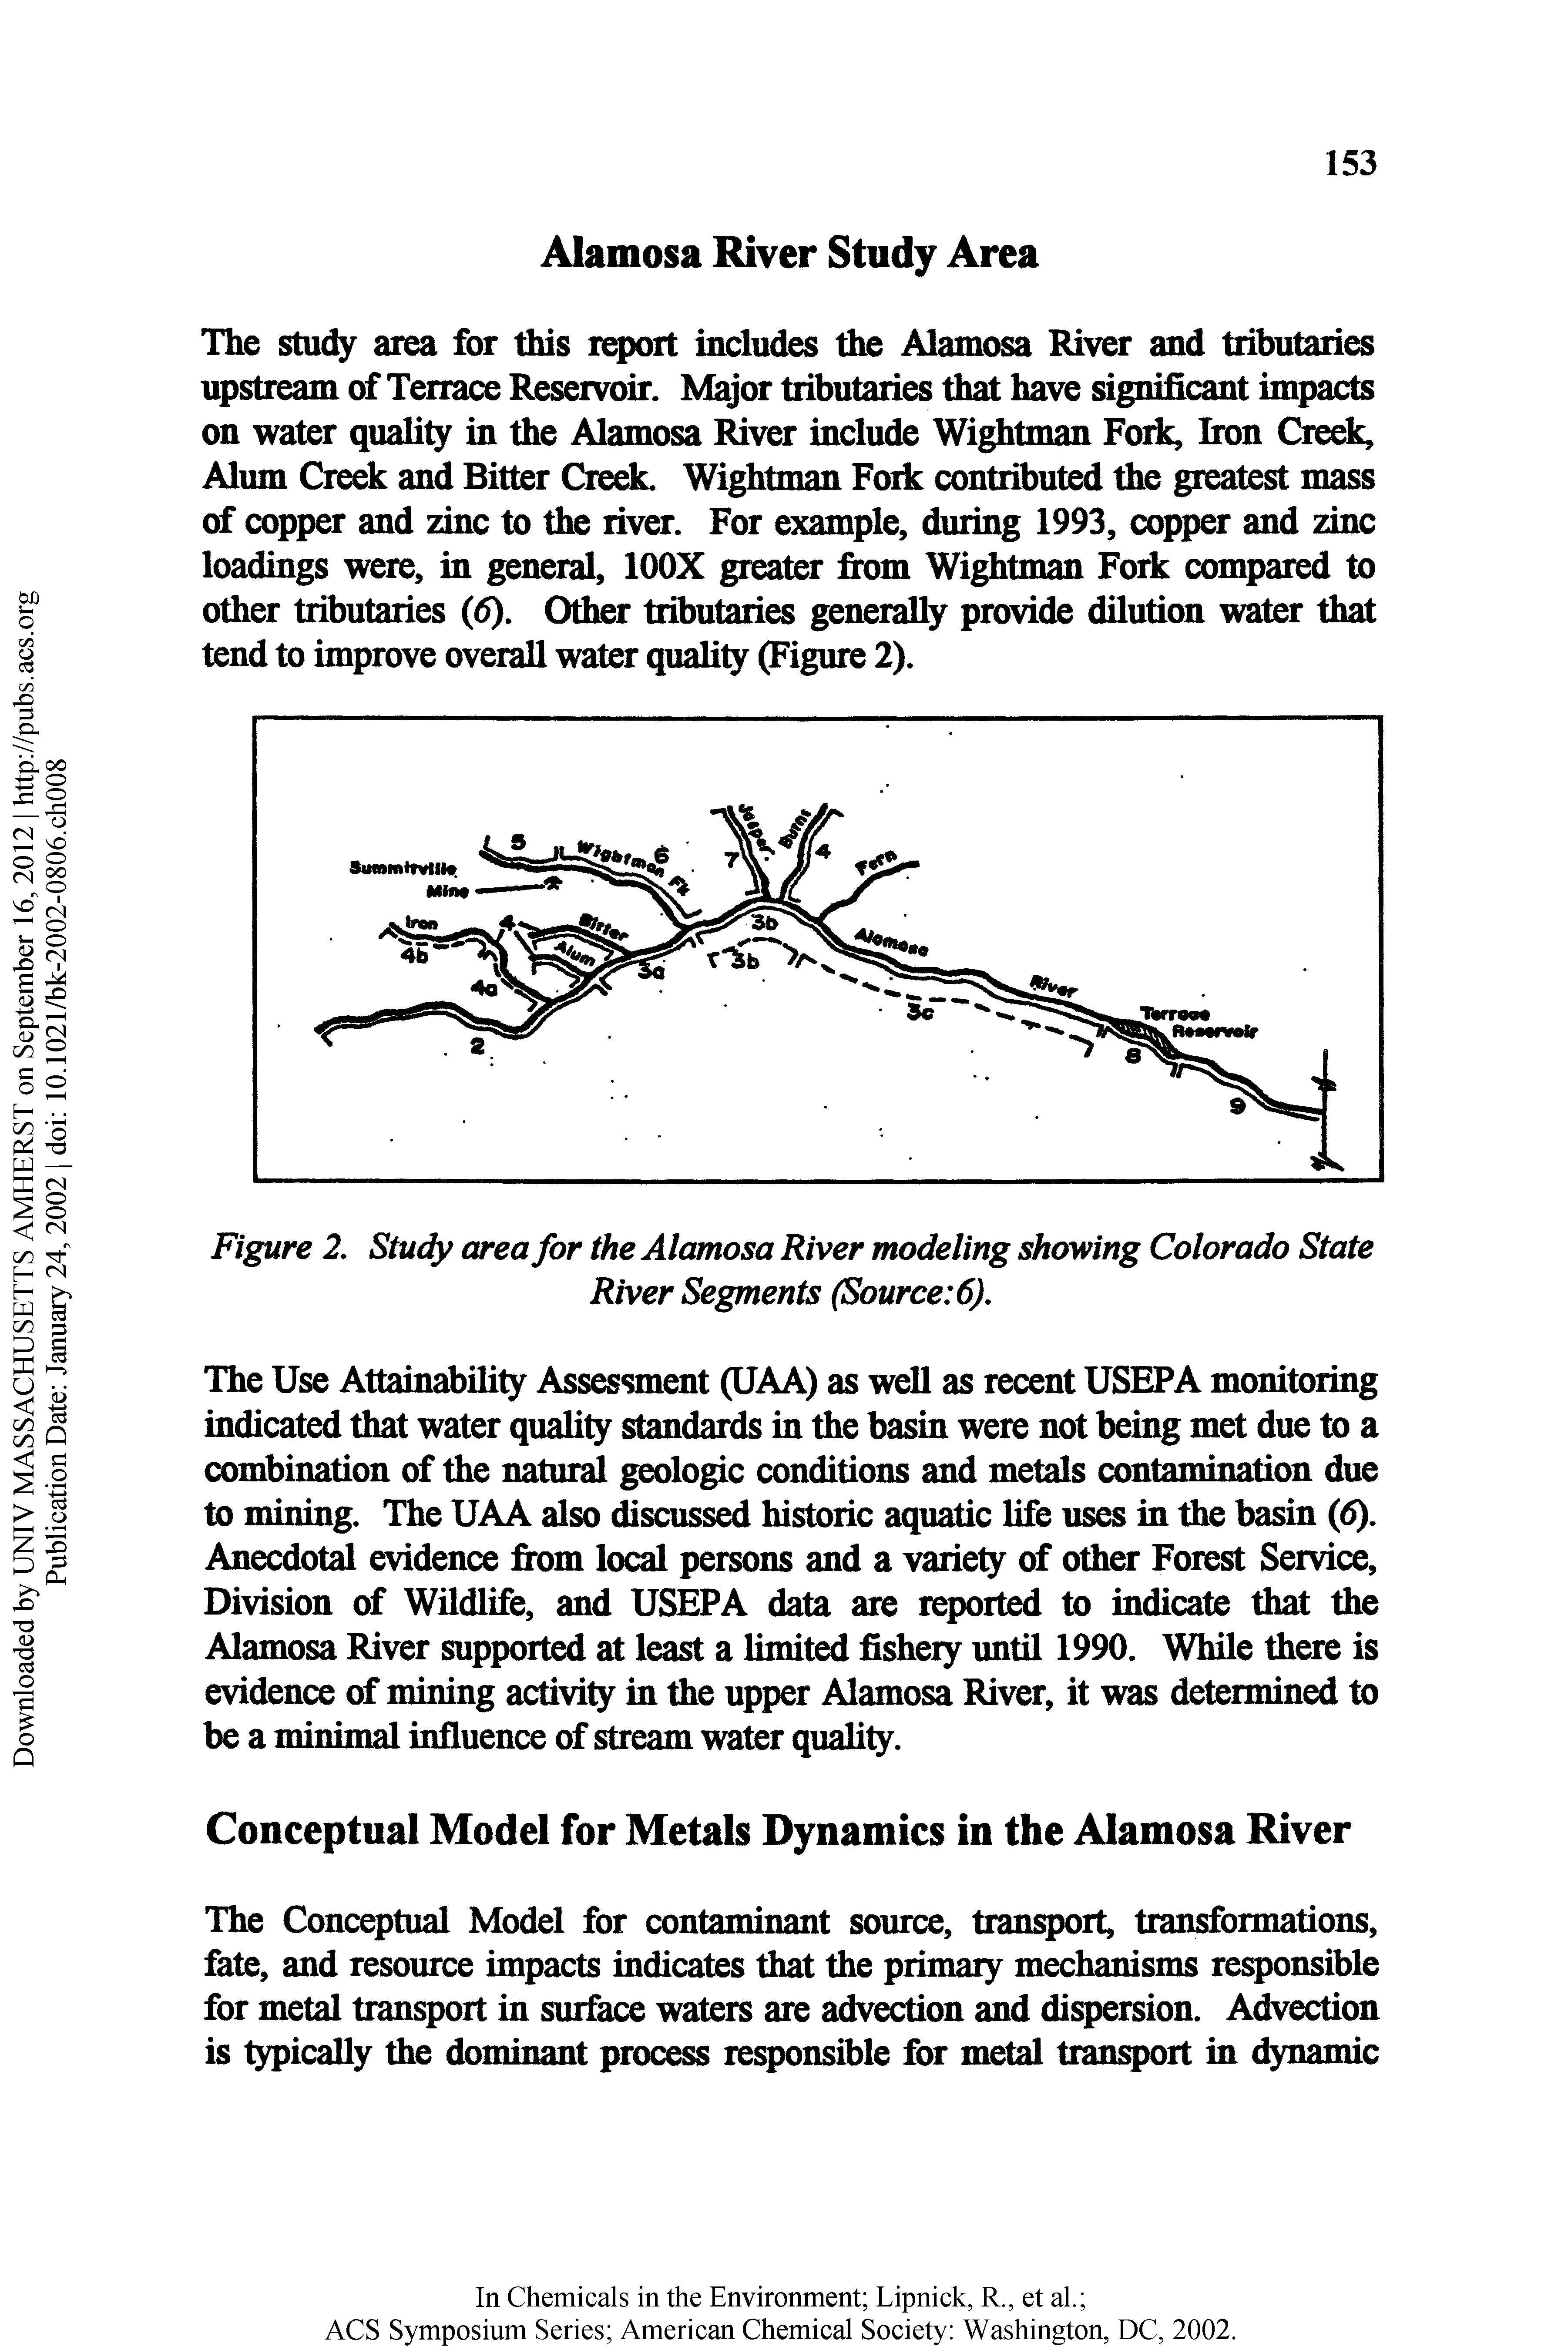 Figure 2. Stu<fy area for the Alamosa River modeling showing Colorado State River Segments (Source 6).